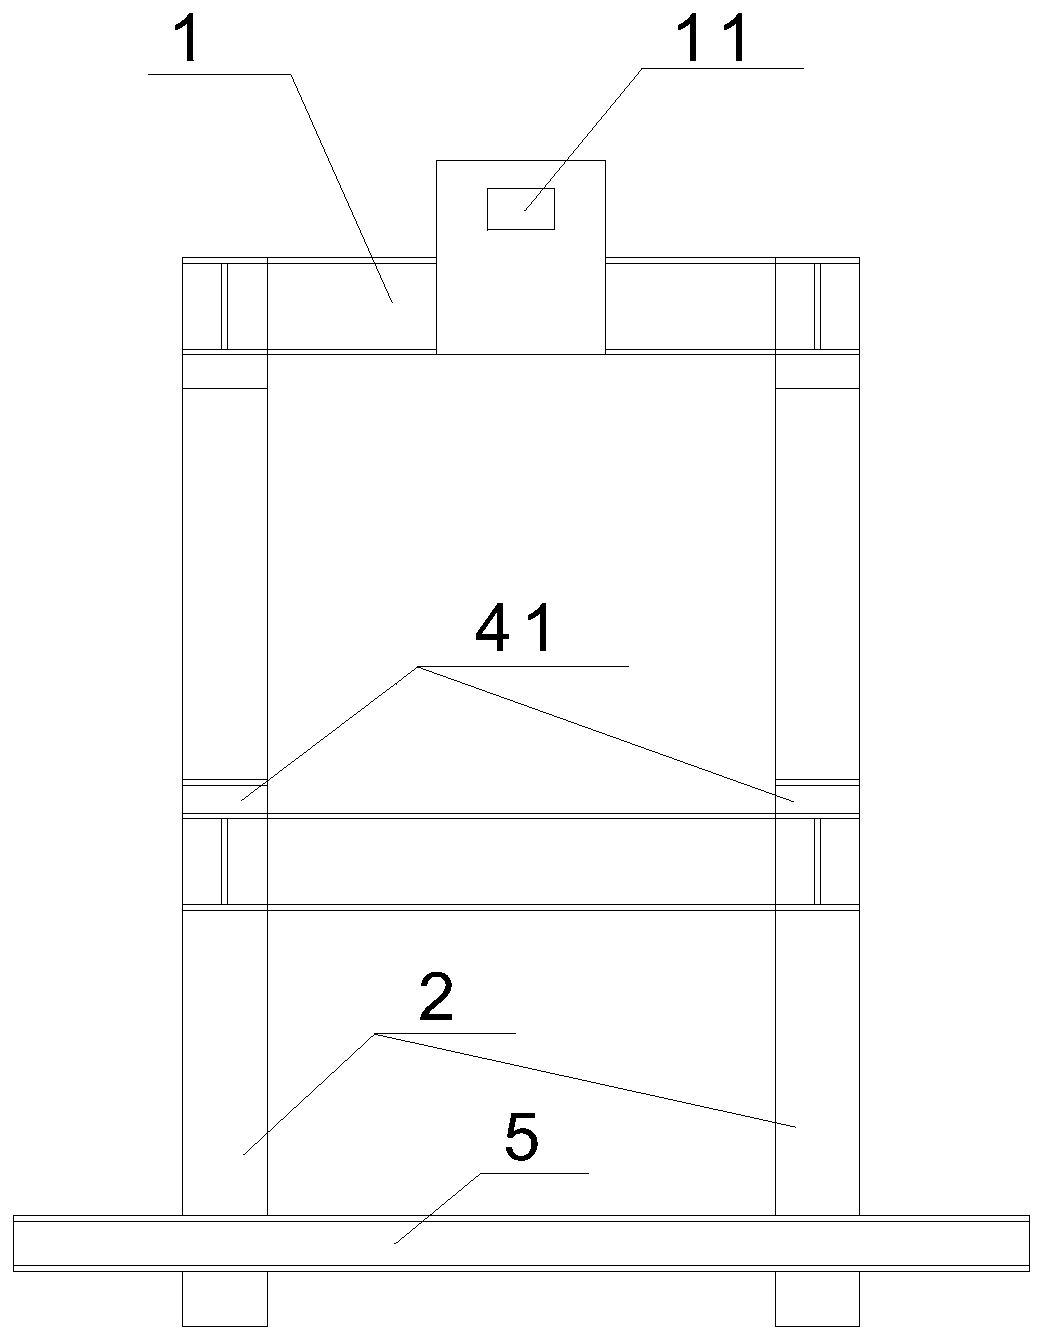 F-shaped standard frame for assembly and disassembly of prefabricated beam formwork and construction method